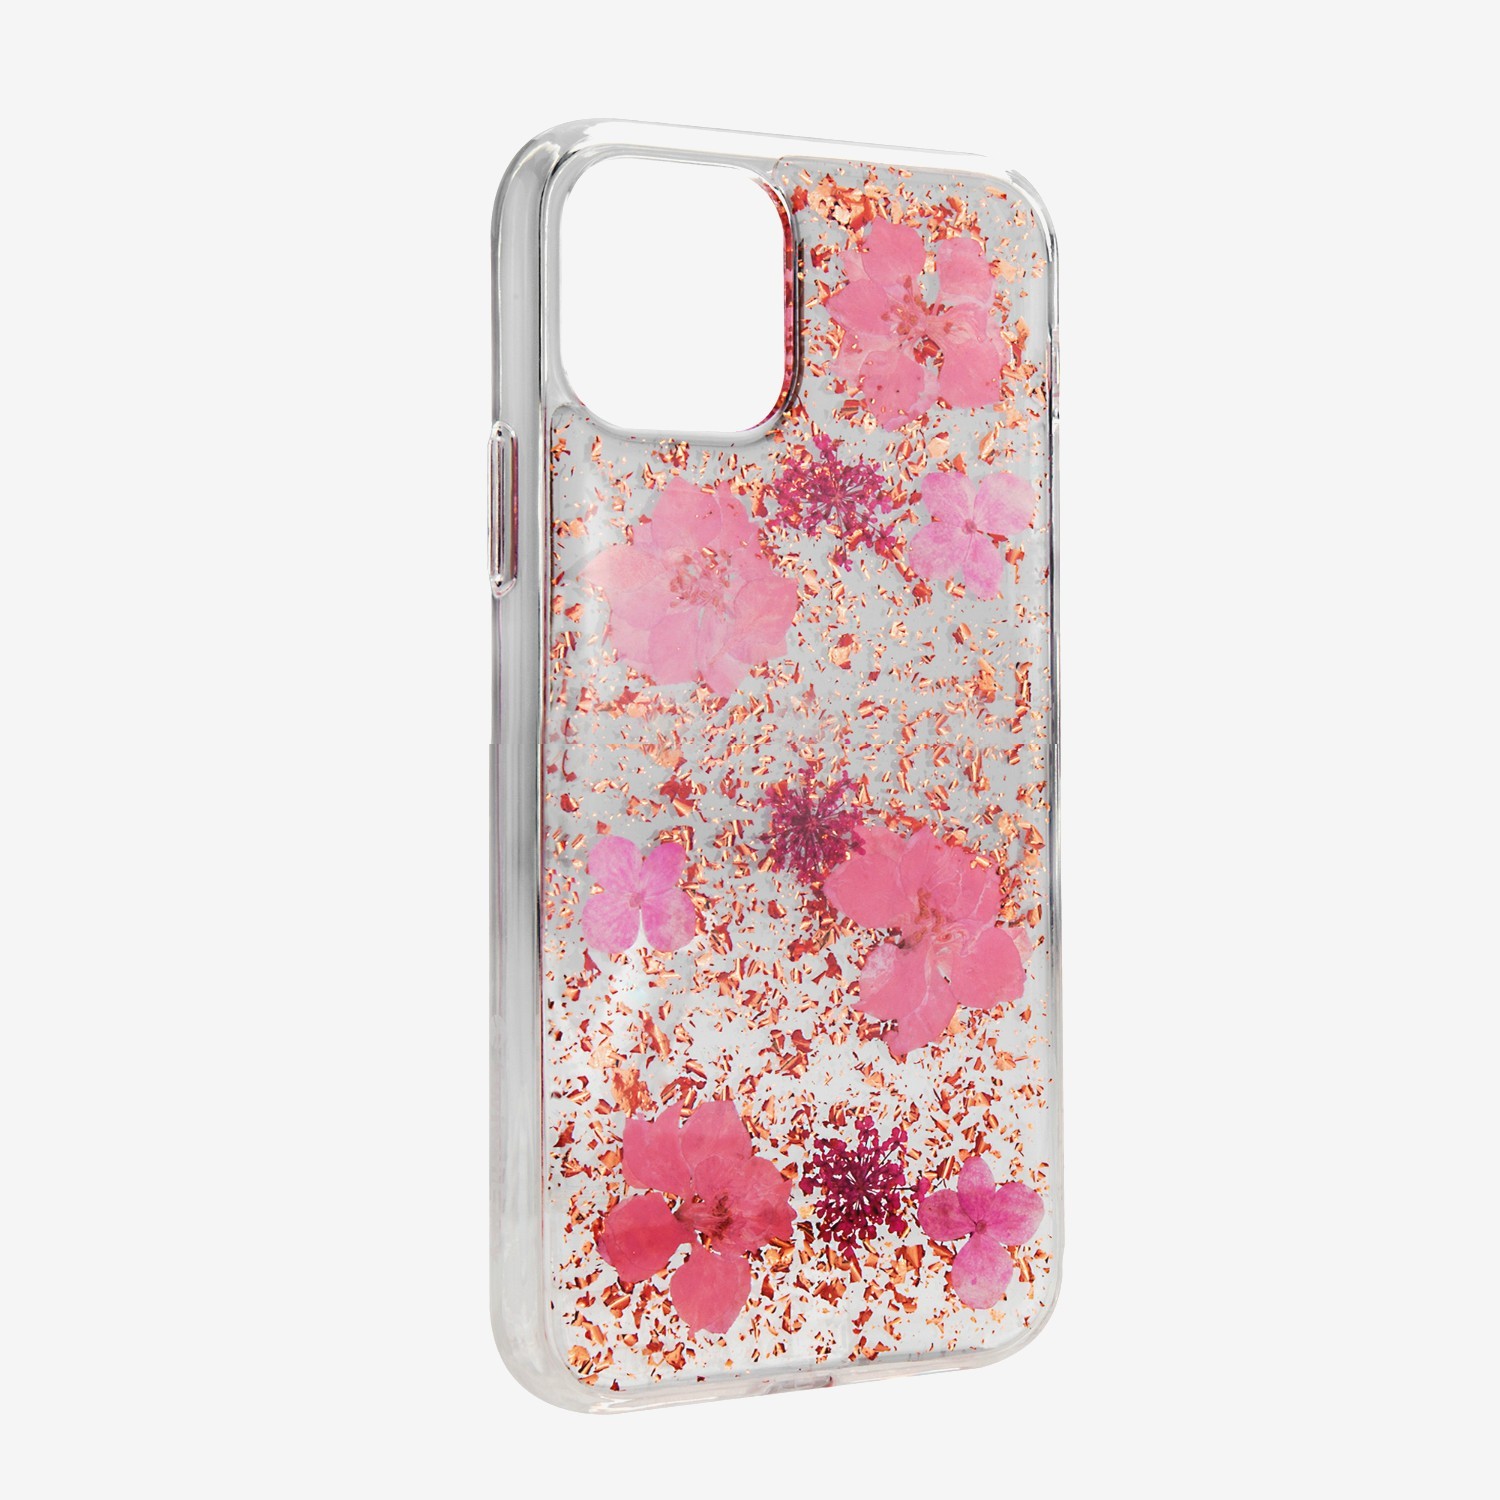 SwitchEasy case for Iphone 11PRO MAX  HANDMADE WITH REAL FLOWERS PINK GS-103-83-160-91